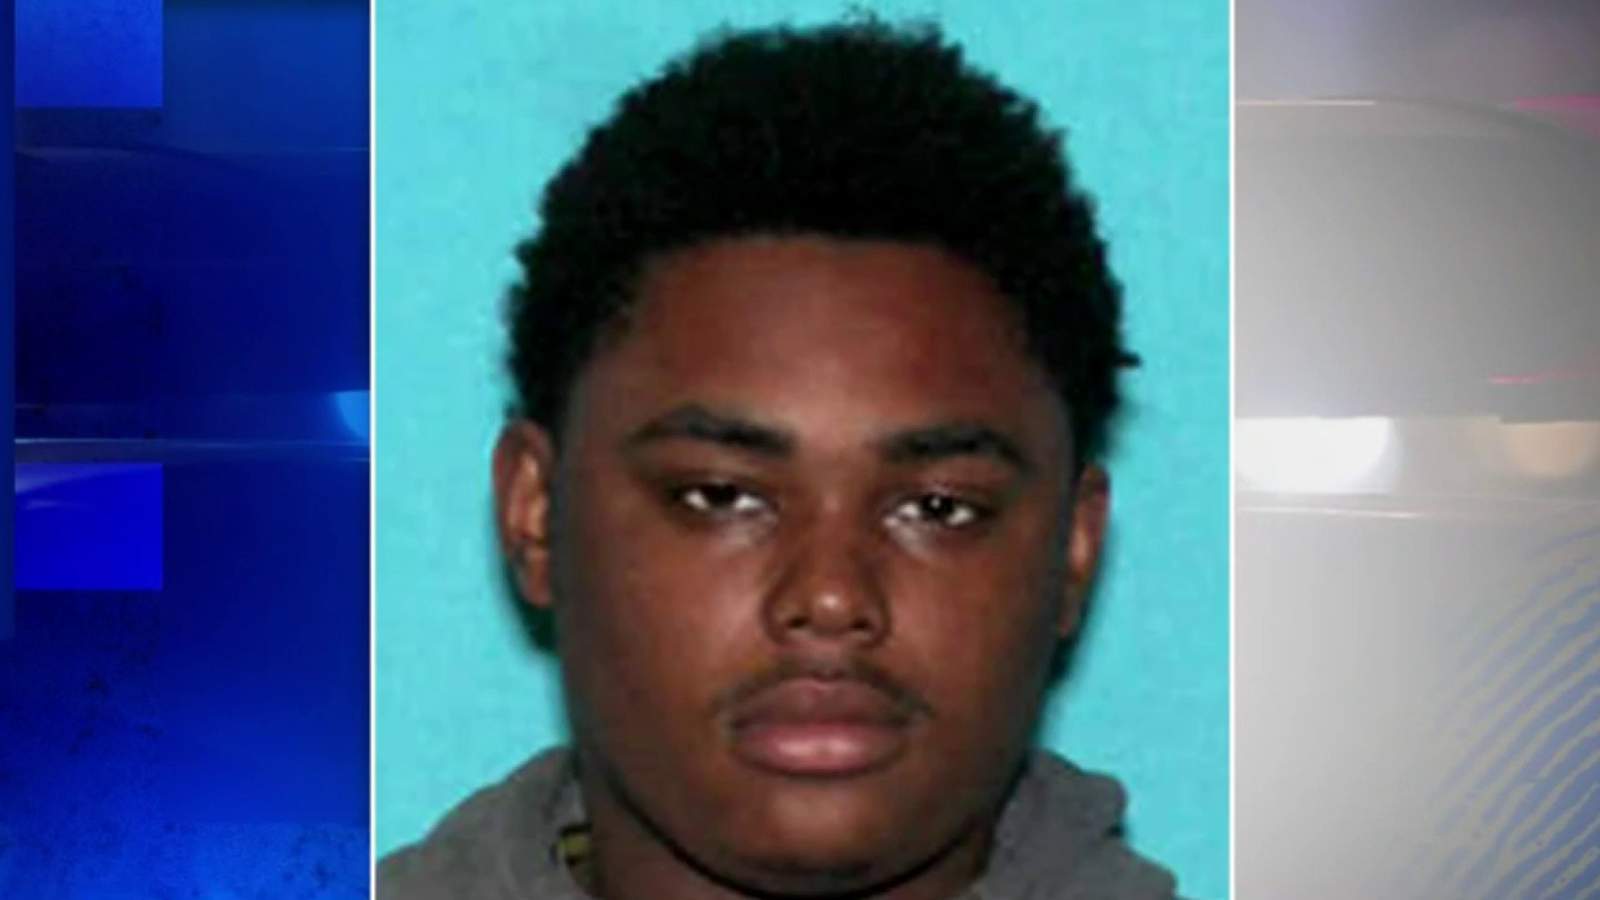 Family in ‘complete shock’ after fatal double-shooting, Detroit police seek 18-year-old suspect